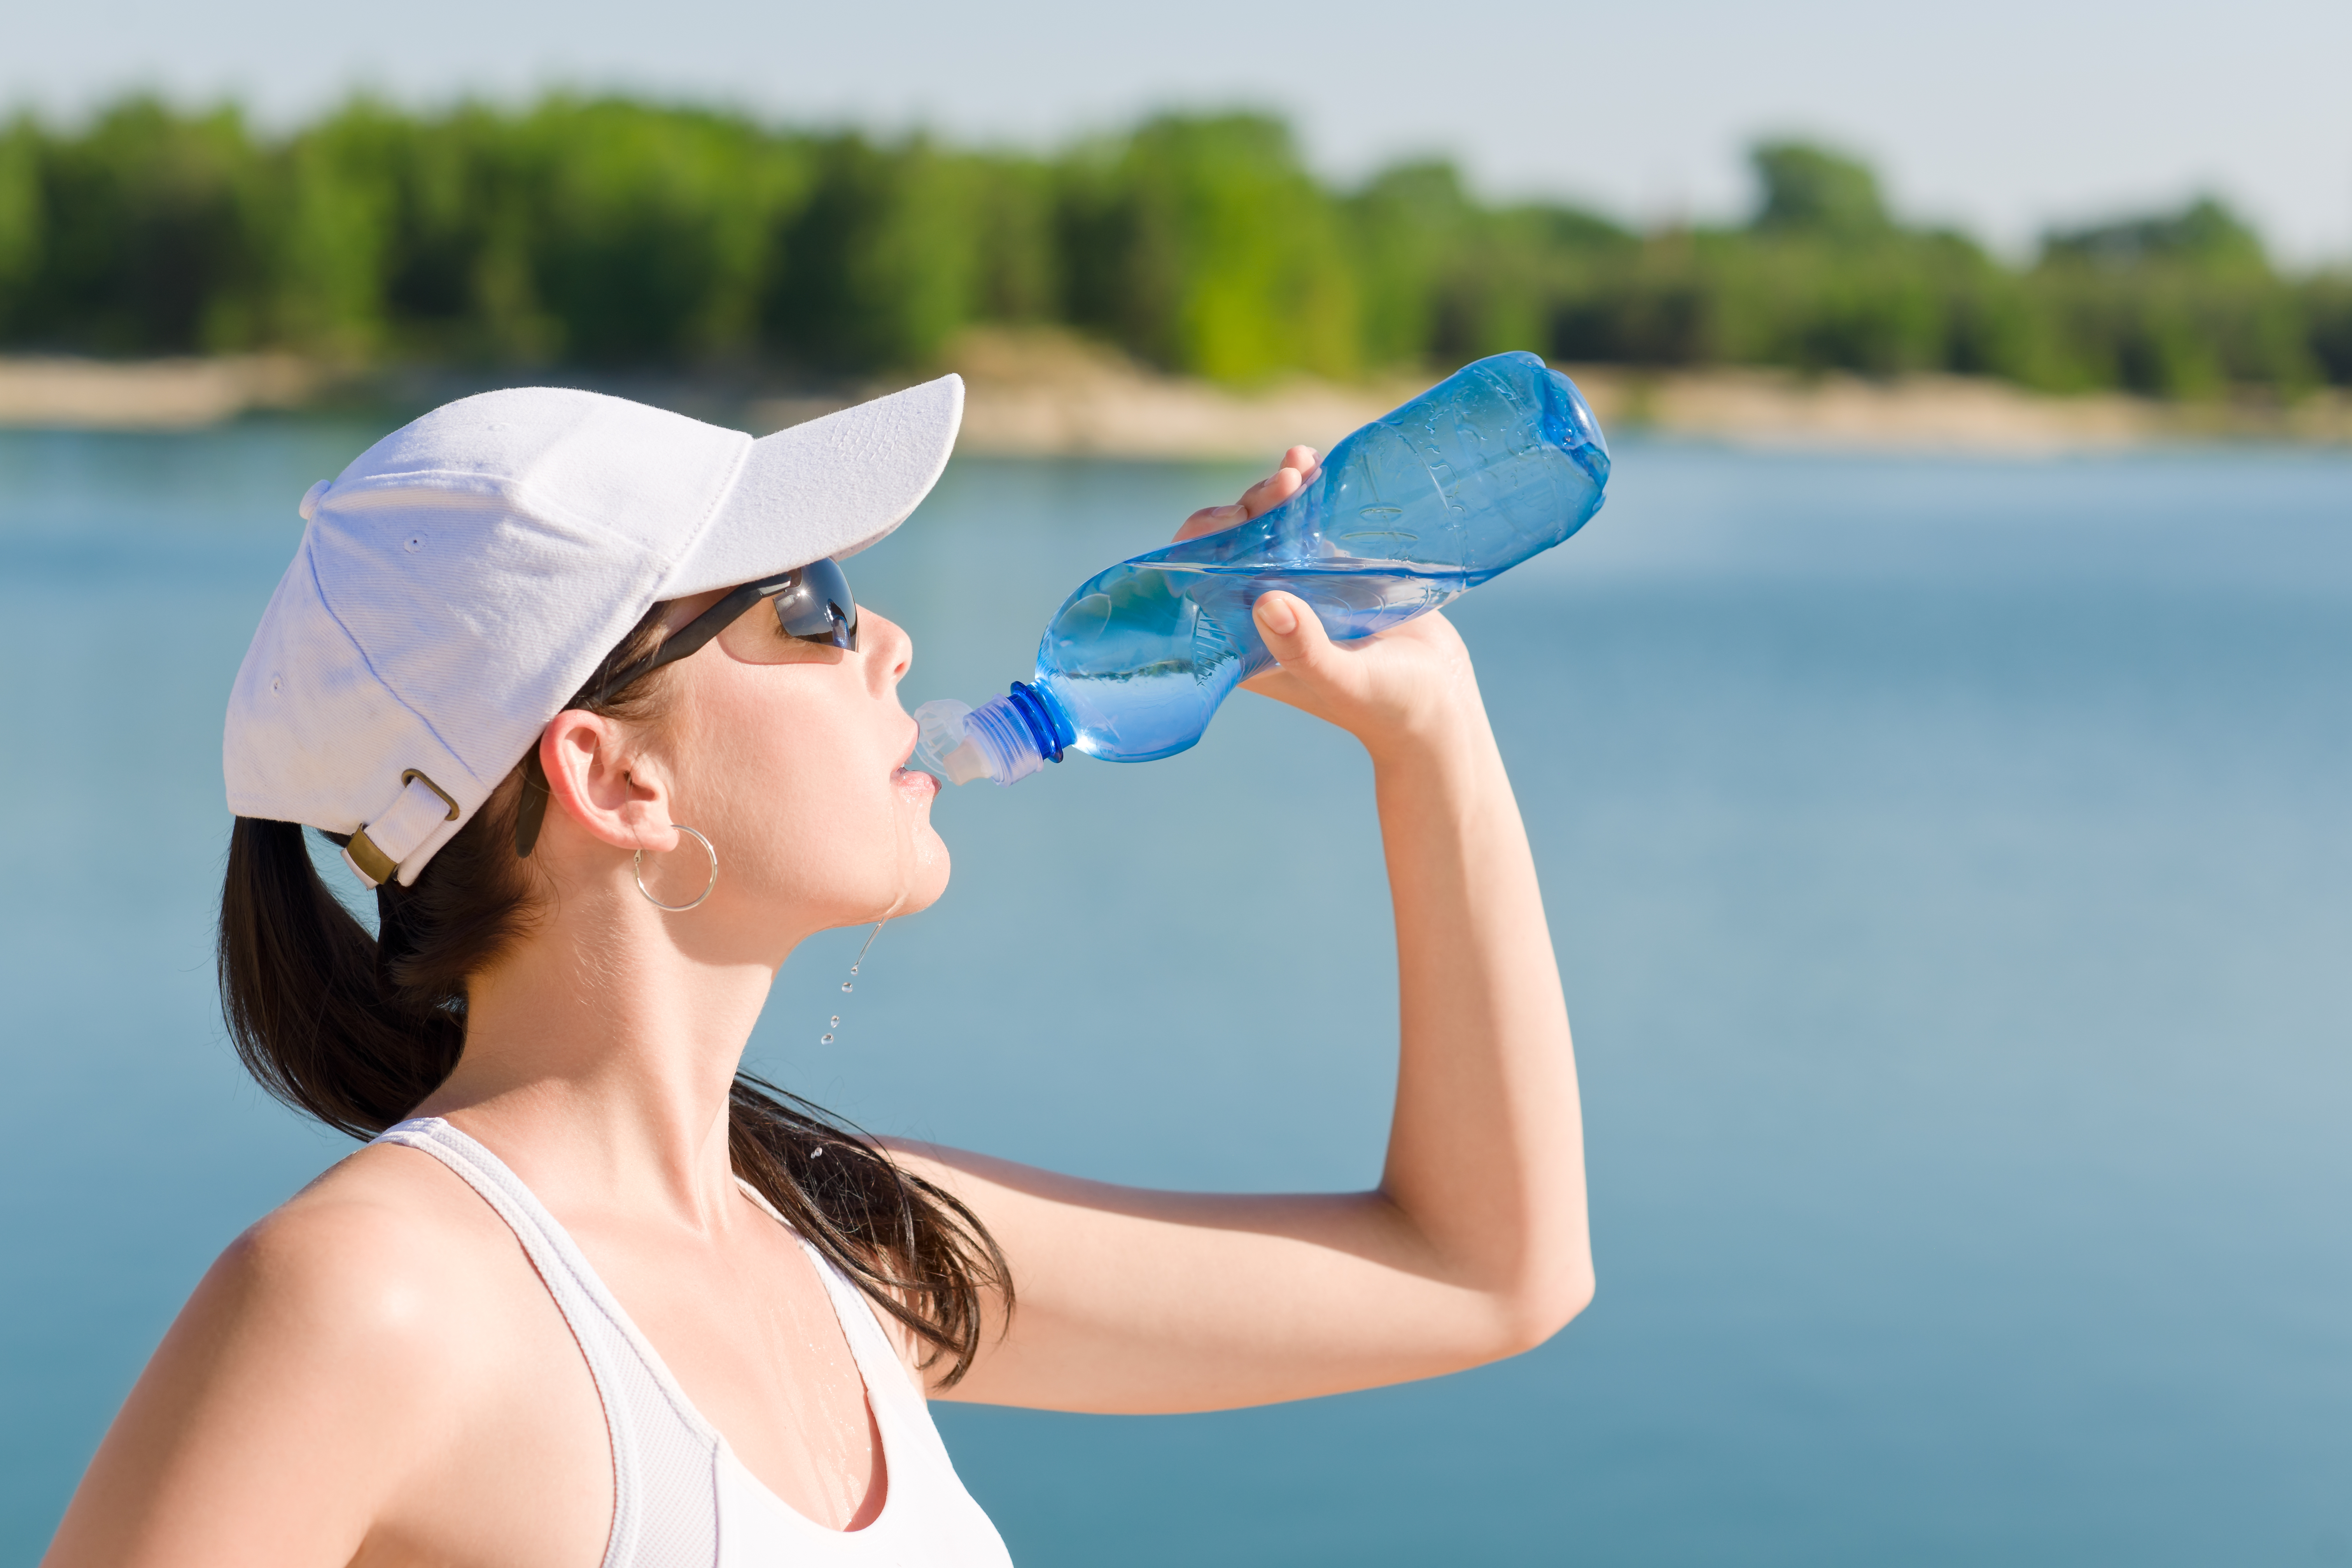 Exercise in the Sun – Got Water?